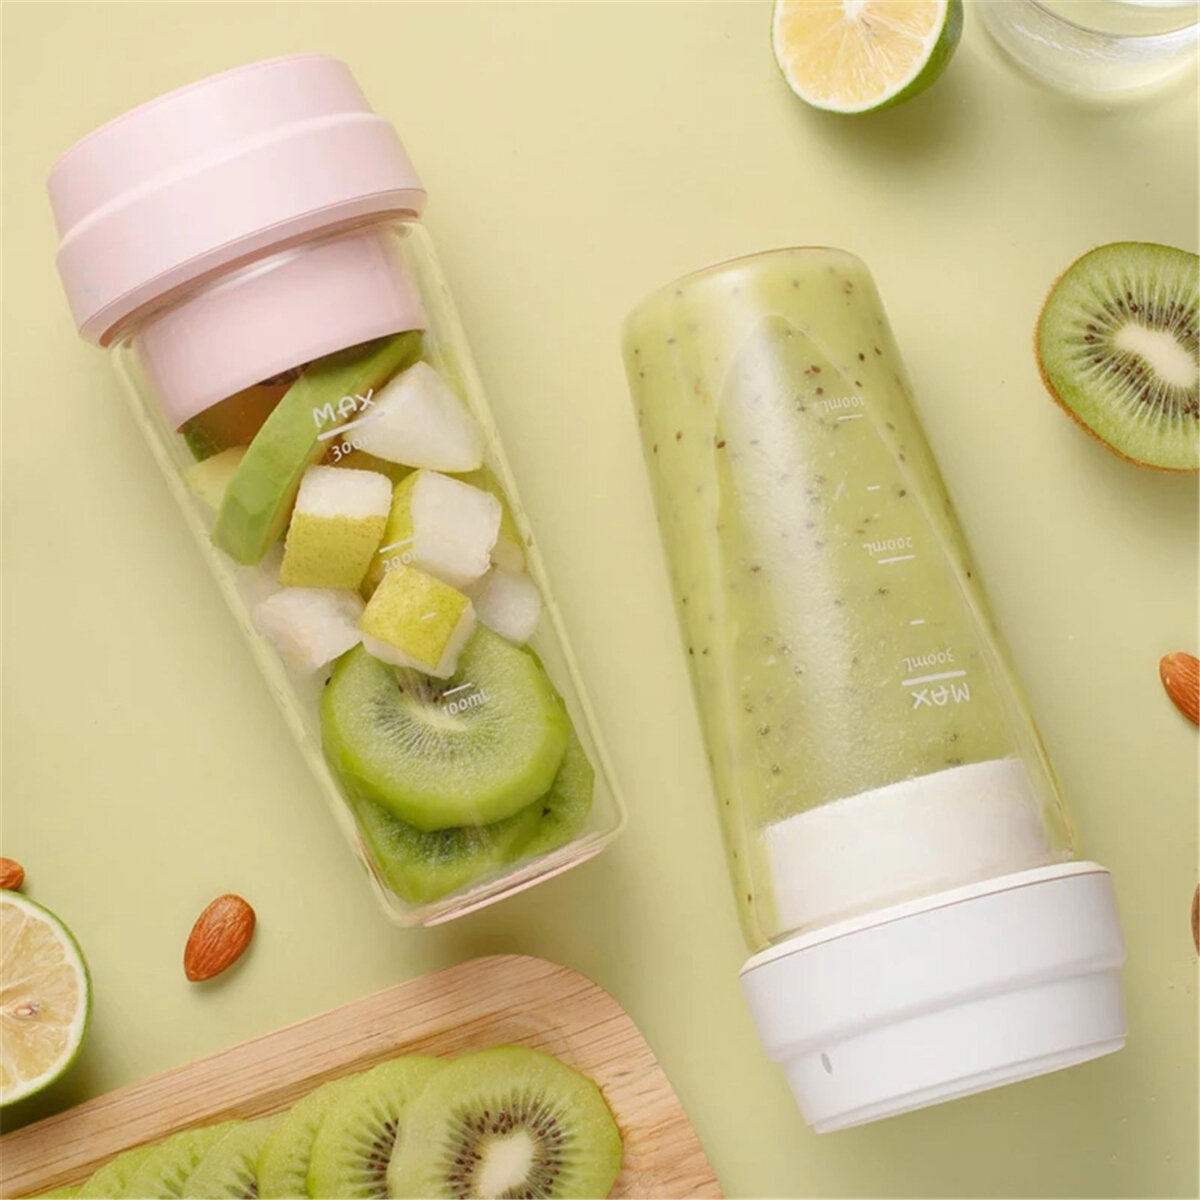 17PIN 400ML Star Fruit Juicer Bottle Portable DIY Juicing Extracter Cup Magnetic Charging